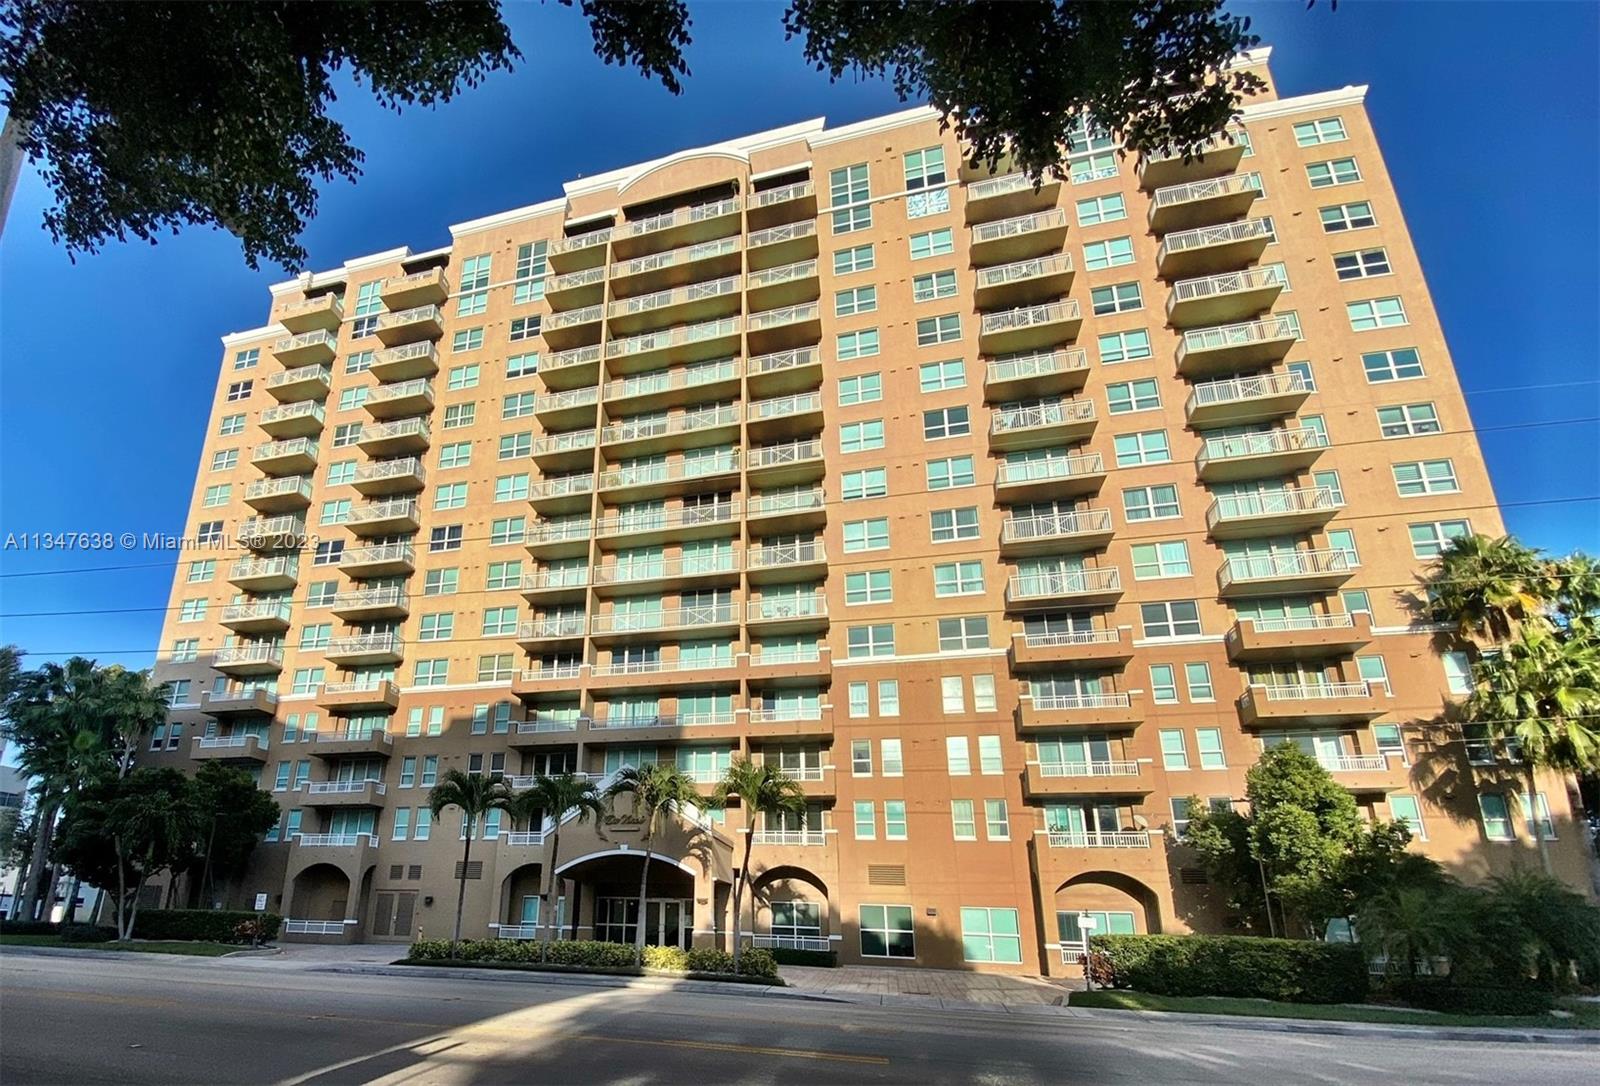 Gorgeous 2 bed 2 bath at Da Vinci Coral Gables Condo. 12th Floor gives great park, bay, and Biltmore views. Original kitchen and bathrooms, with updated appliances.